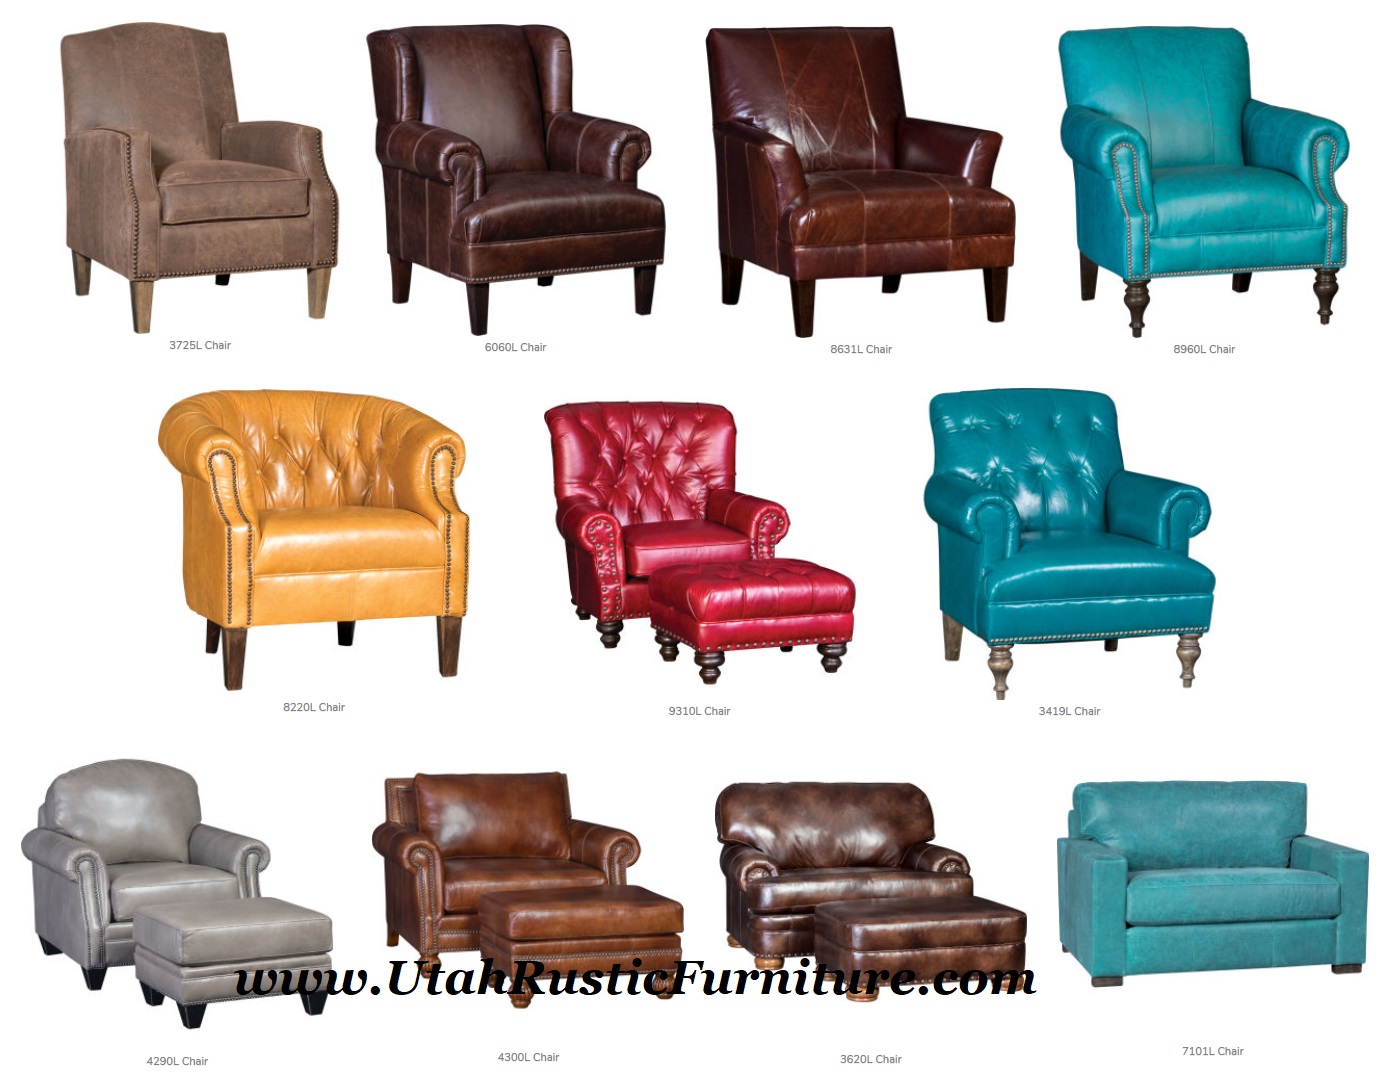 Bradley&#39;s Furniture Etc. - Mayo Leather and Fabric Sofas